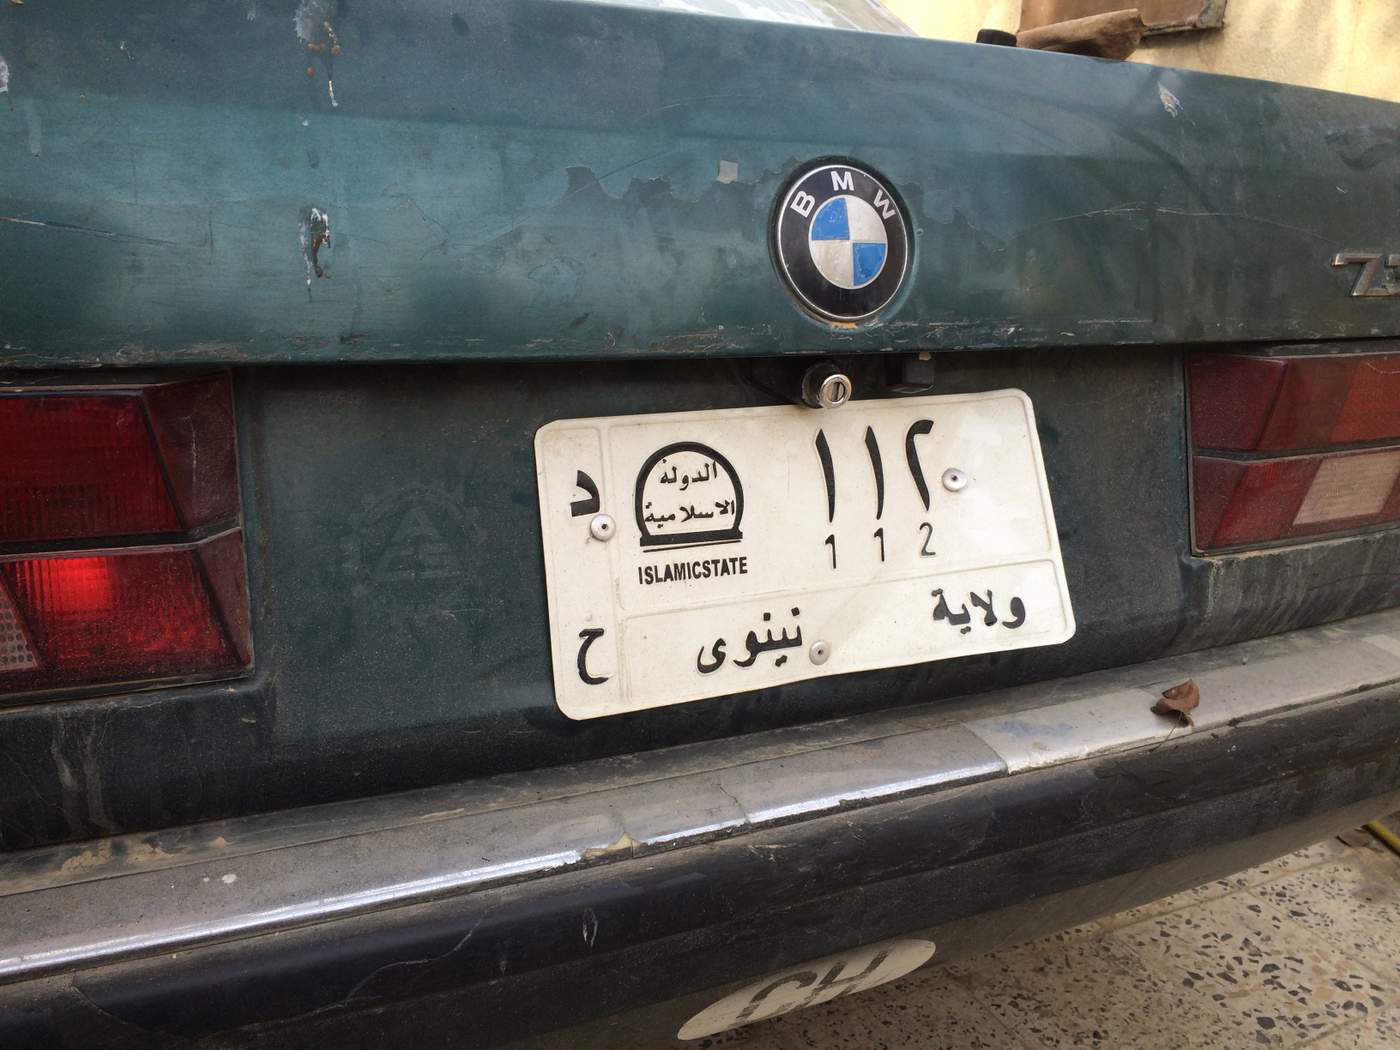 IS militants issued car license plates, identification papers and city services like water, electricity and garbage pick up in Mosul, Iraq. (H. Murdock\/VOA) Jan. 13, 2017